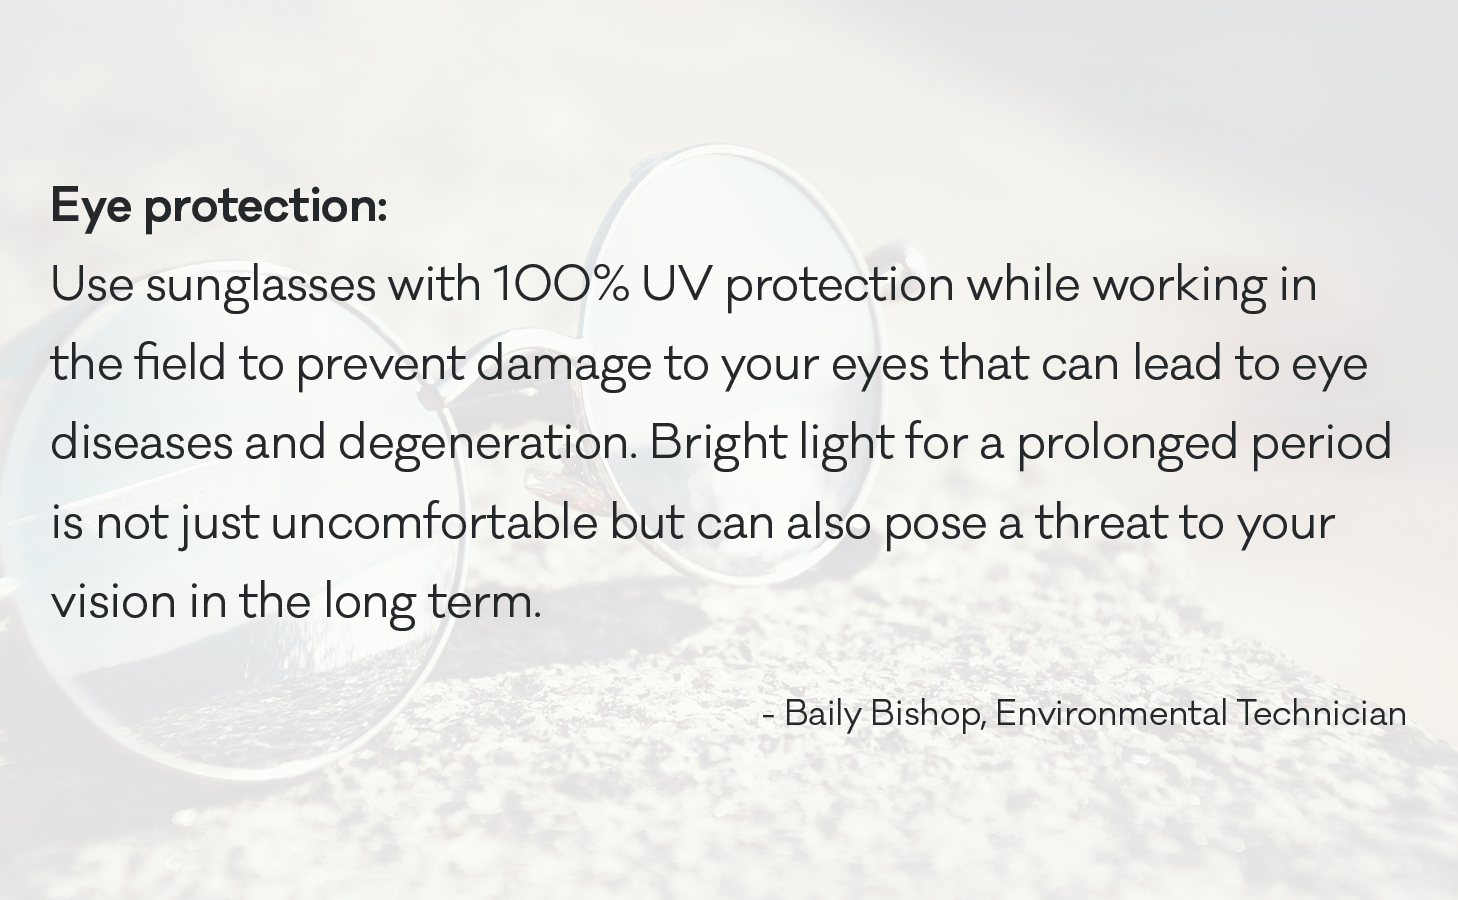 Use sunglasses with 100% UV protection while working in the field to prevent damage to your eyes that can lead to eye diseases and degeneration. Bright light for a prolonged period is not just uncomfortable but can also pose a threat to your vision in the long term.